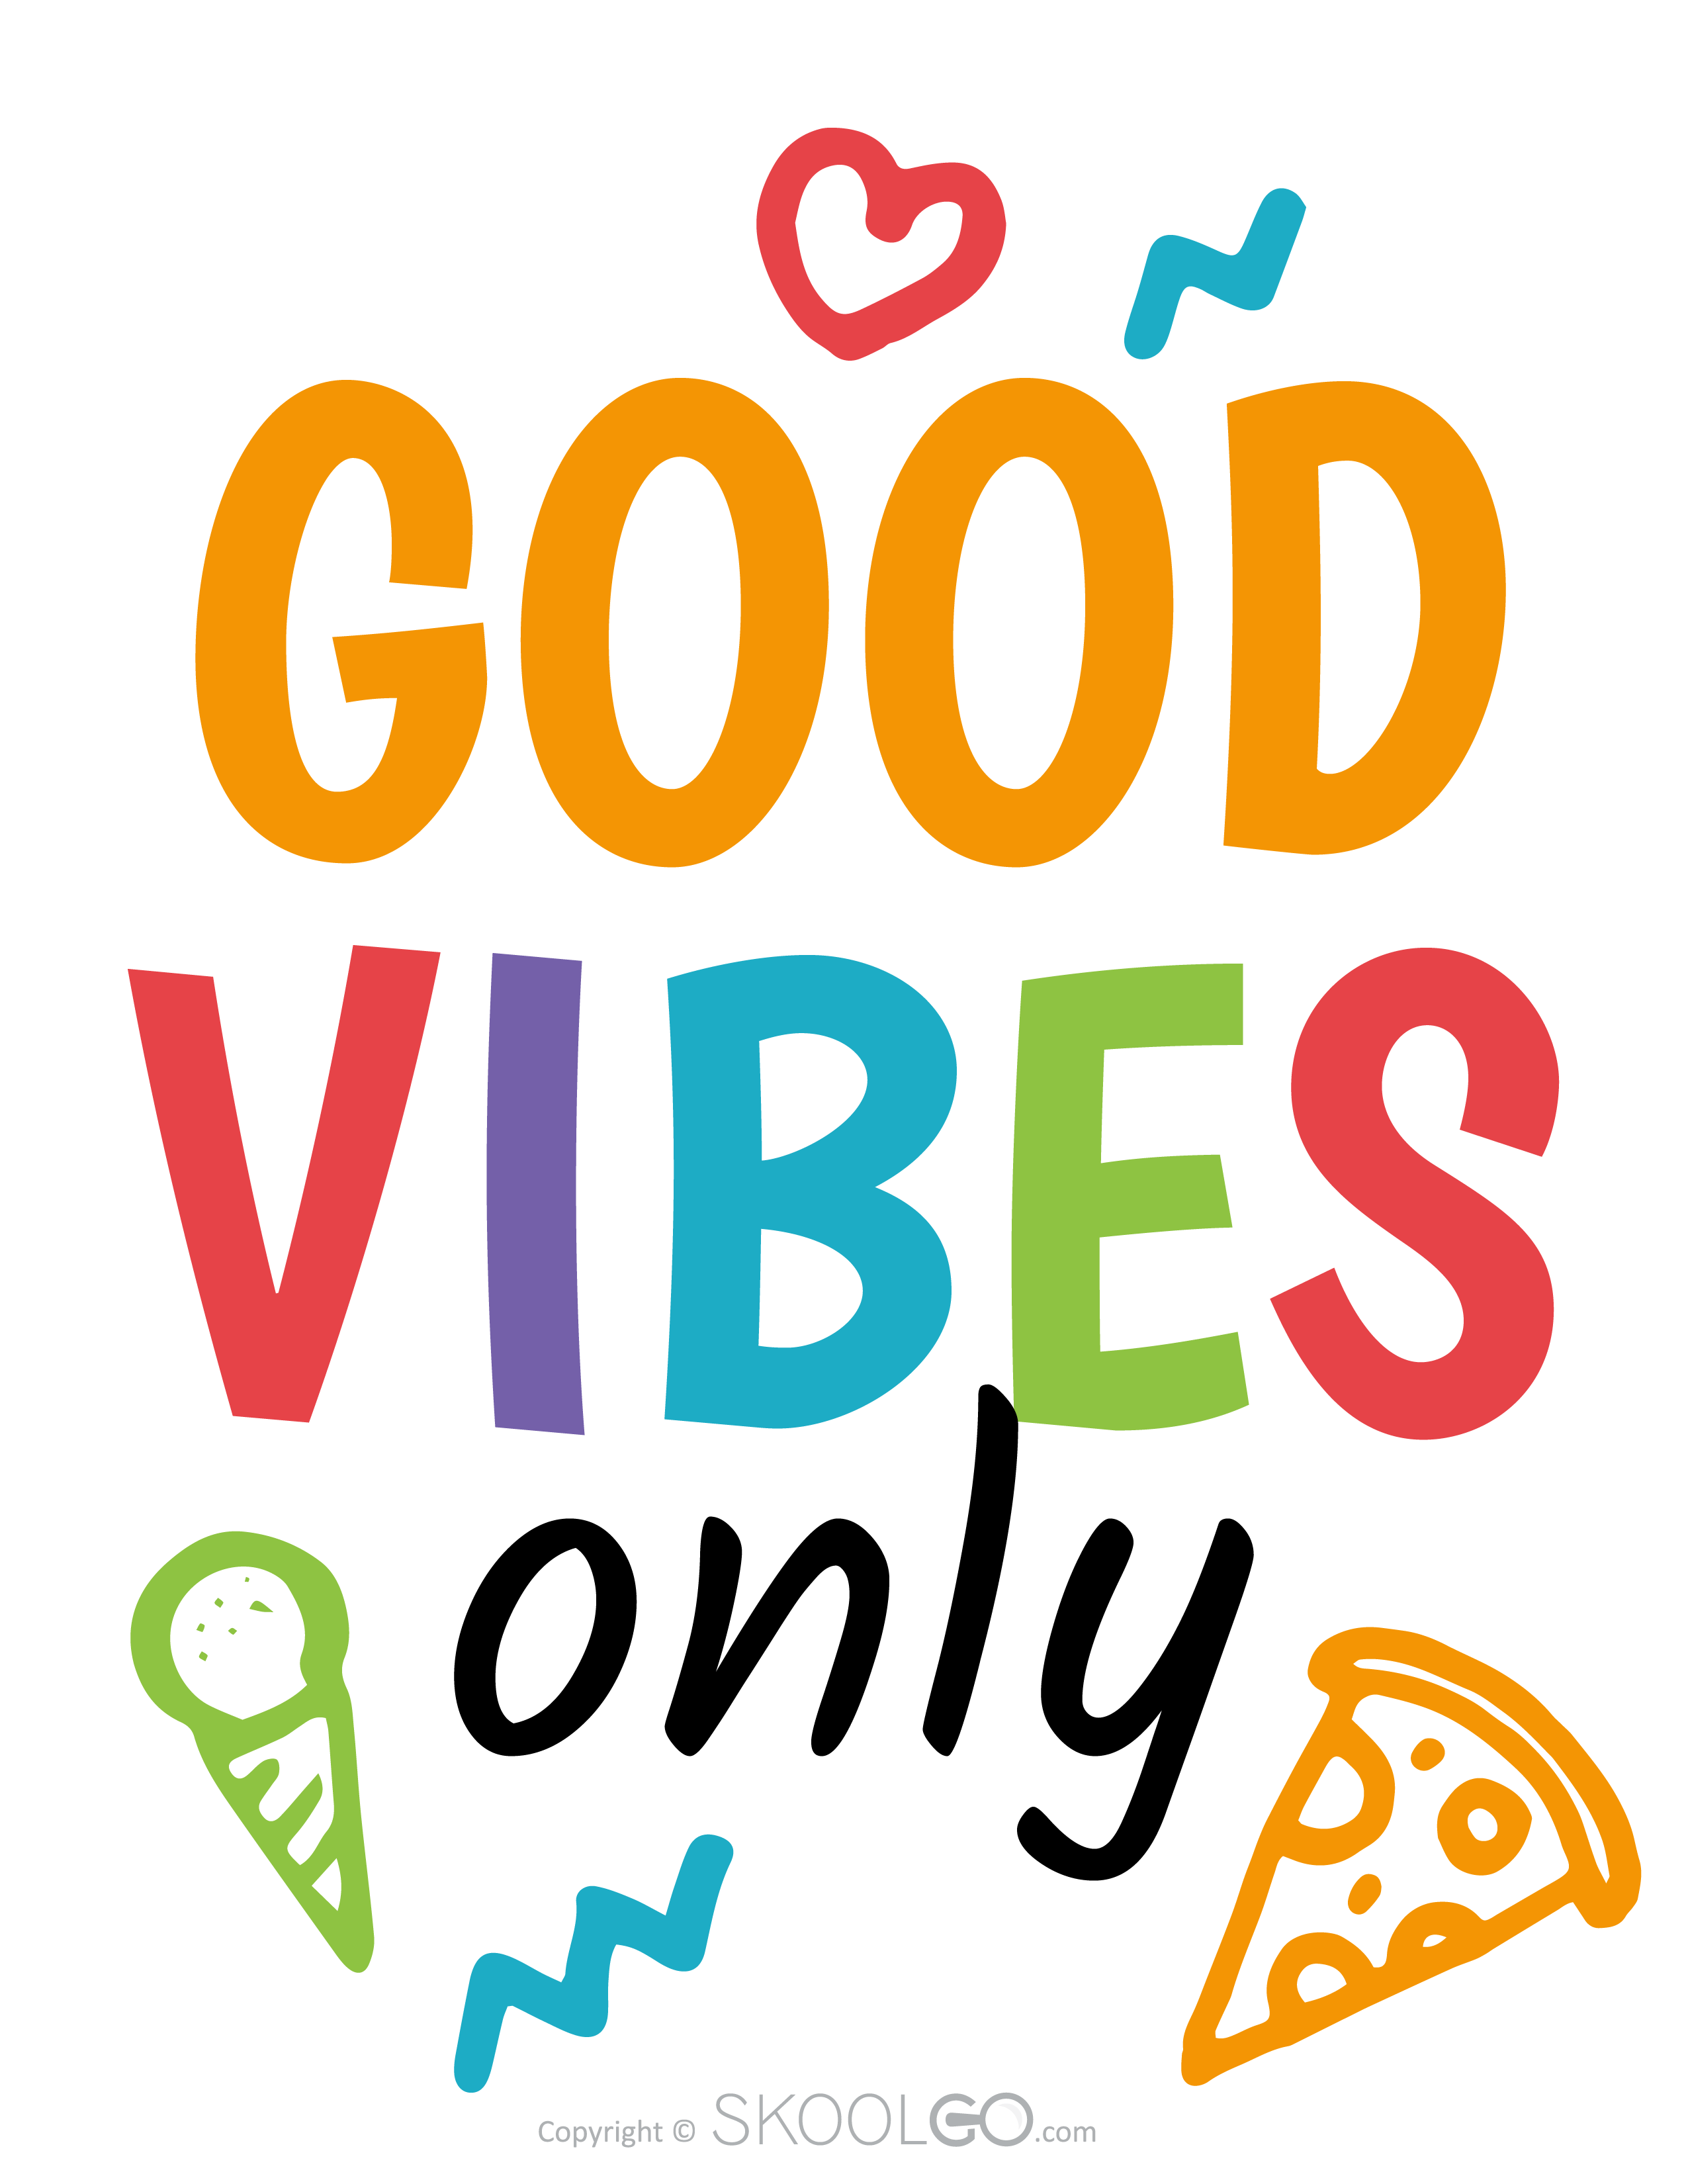 Good Vibes Only - Free Poster